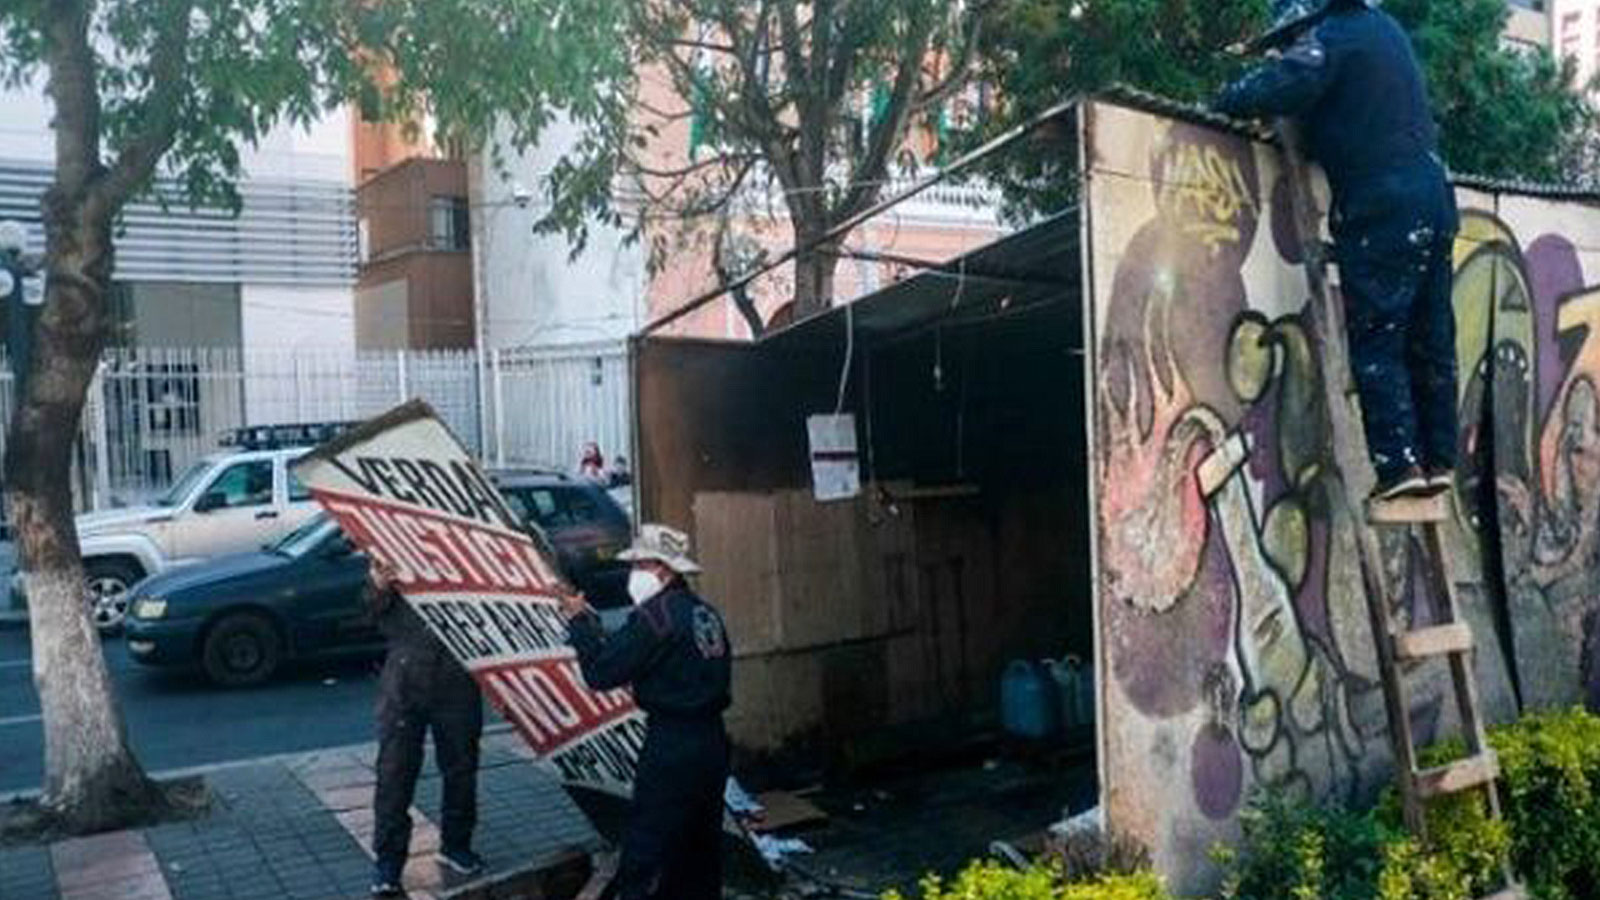 The tents set up in protest 10 years ago in front of the Ministry of Justice are finally being taken down after the signing of this agreement with the Bolivian Government. Aug. 21, 2022. |